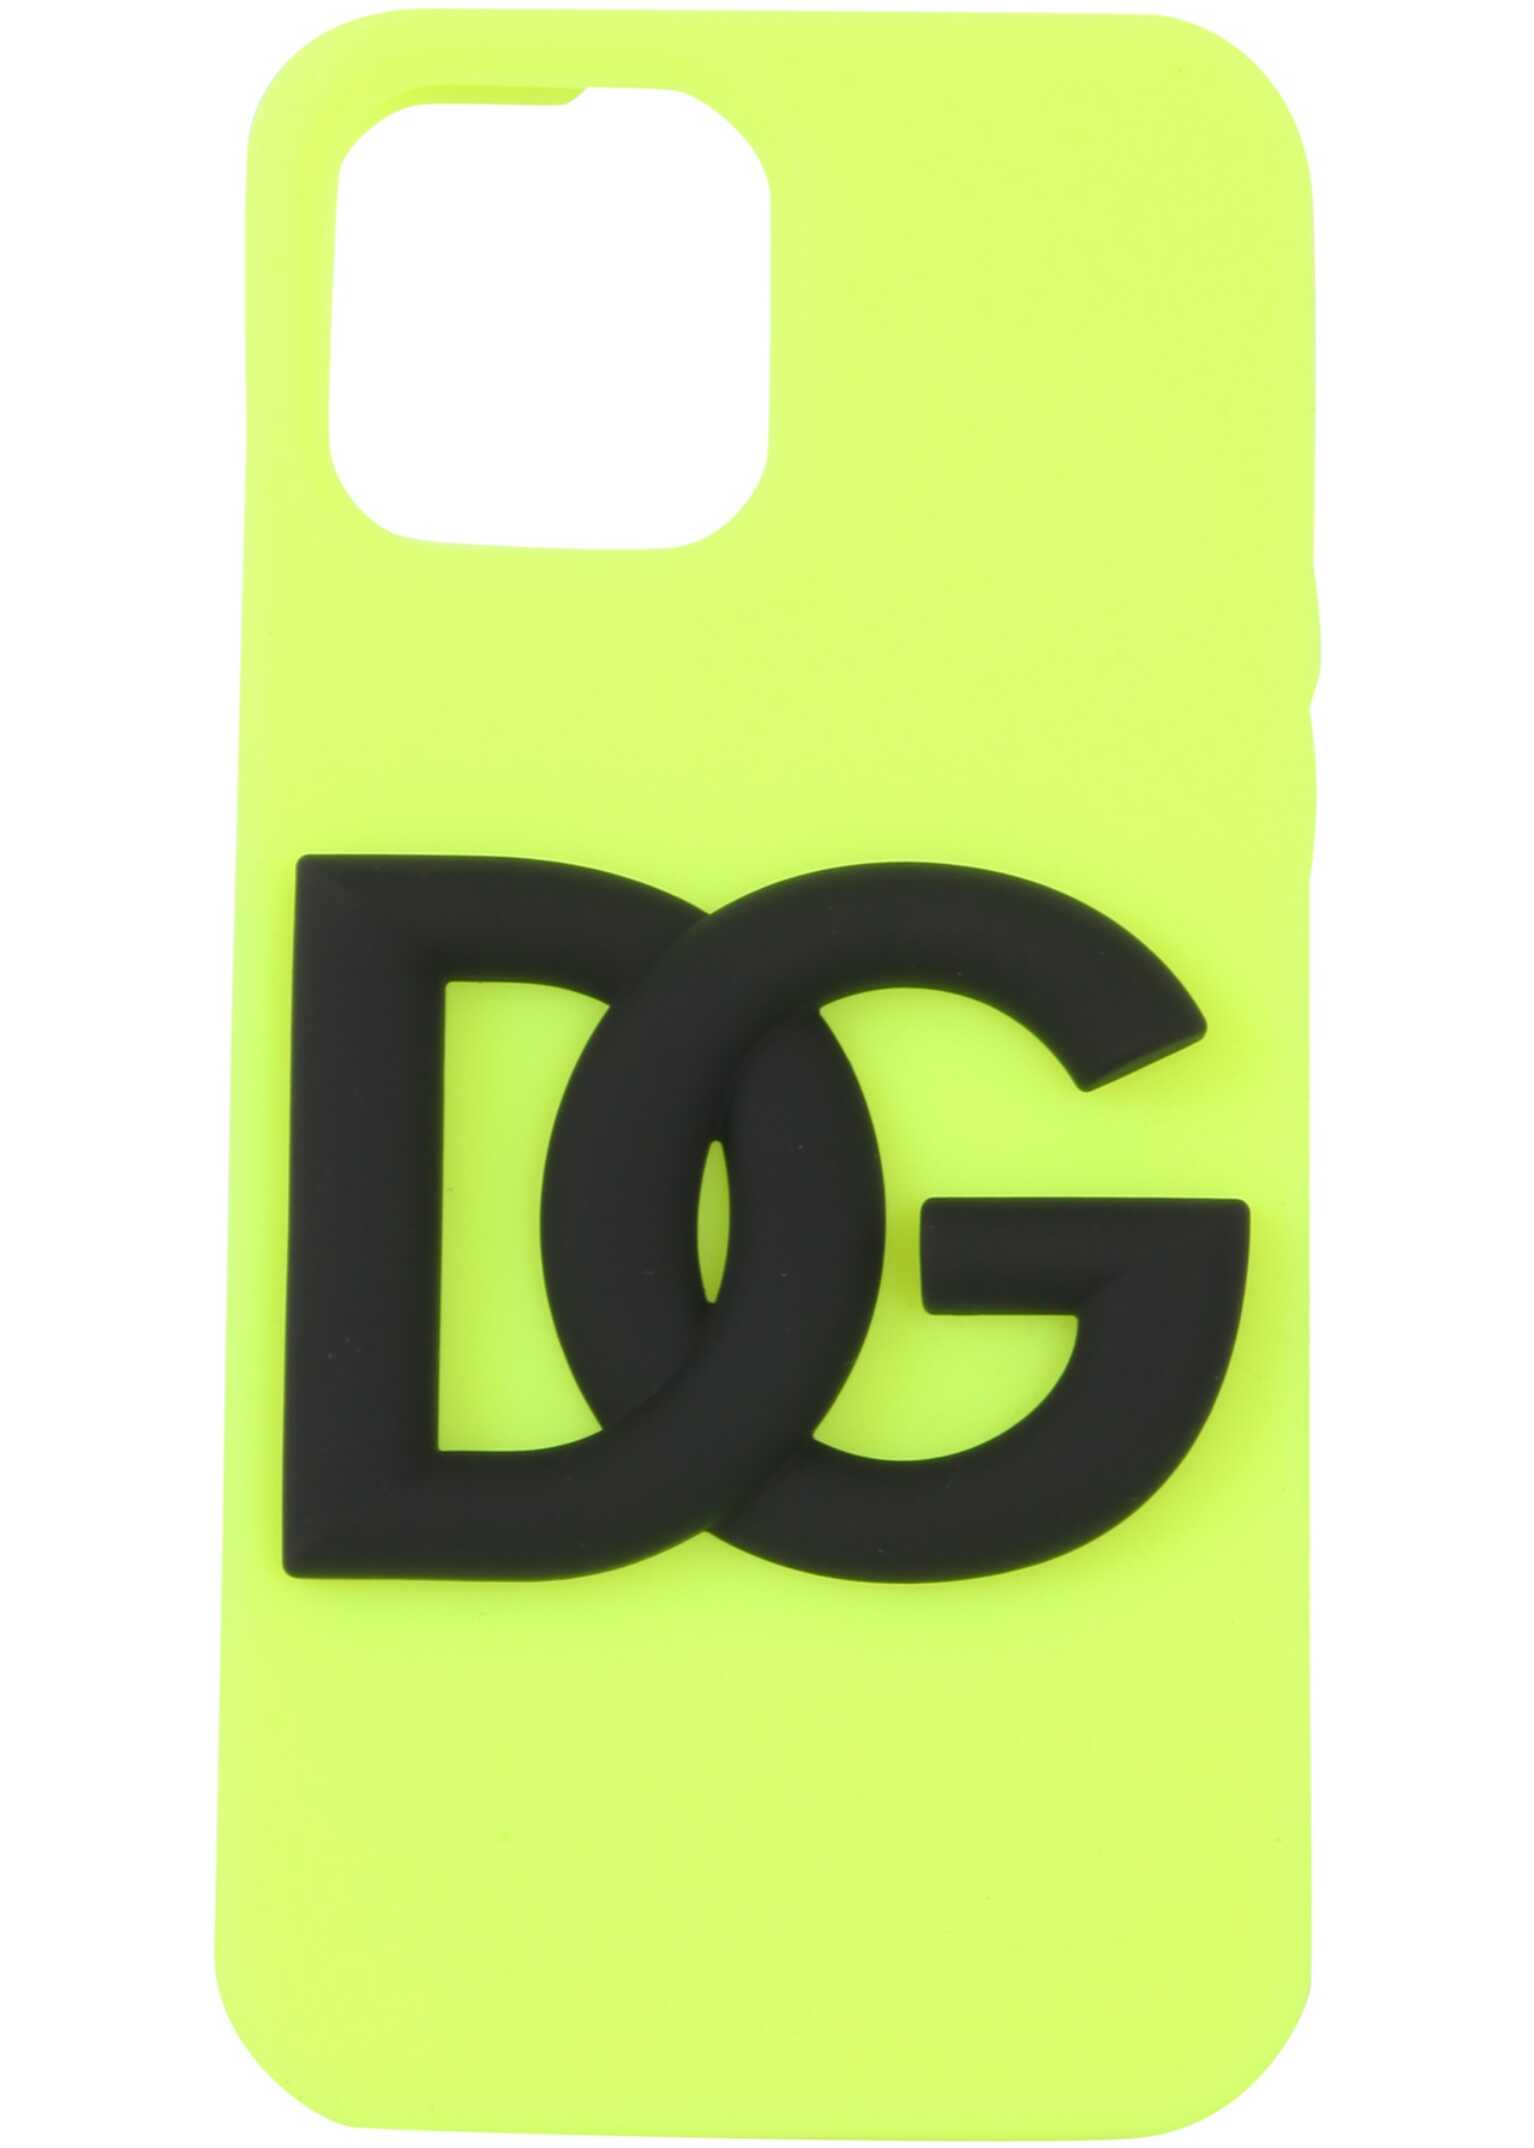 Dolce & Gabbana Iphone 12 Pro Max Cover BP2908_AO9768G289 YELLOW image0